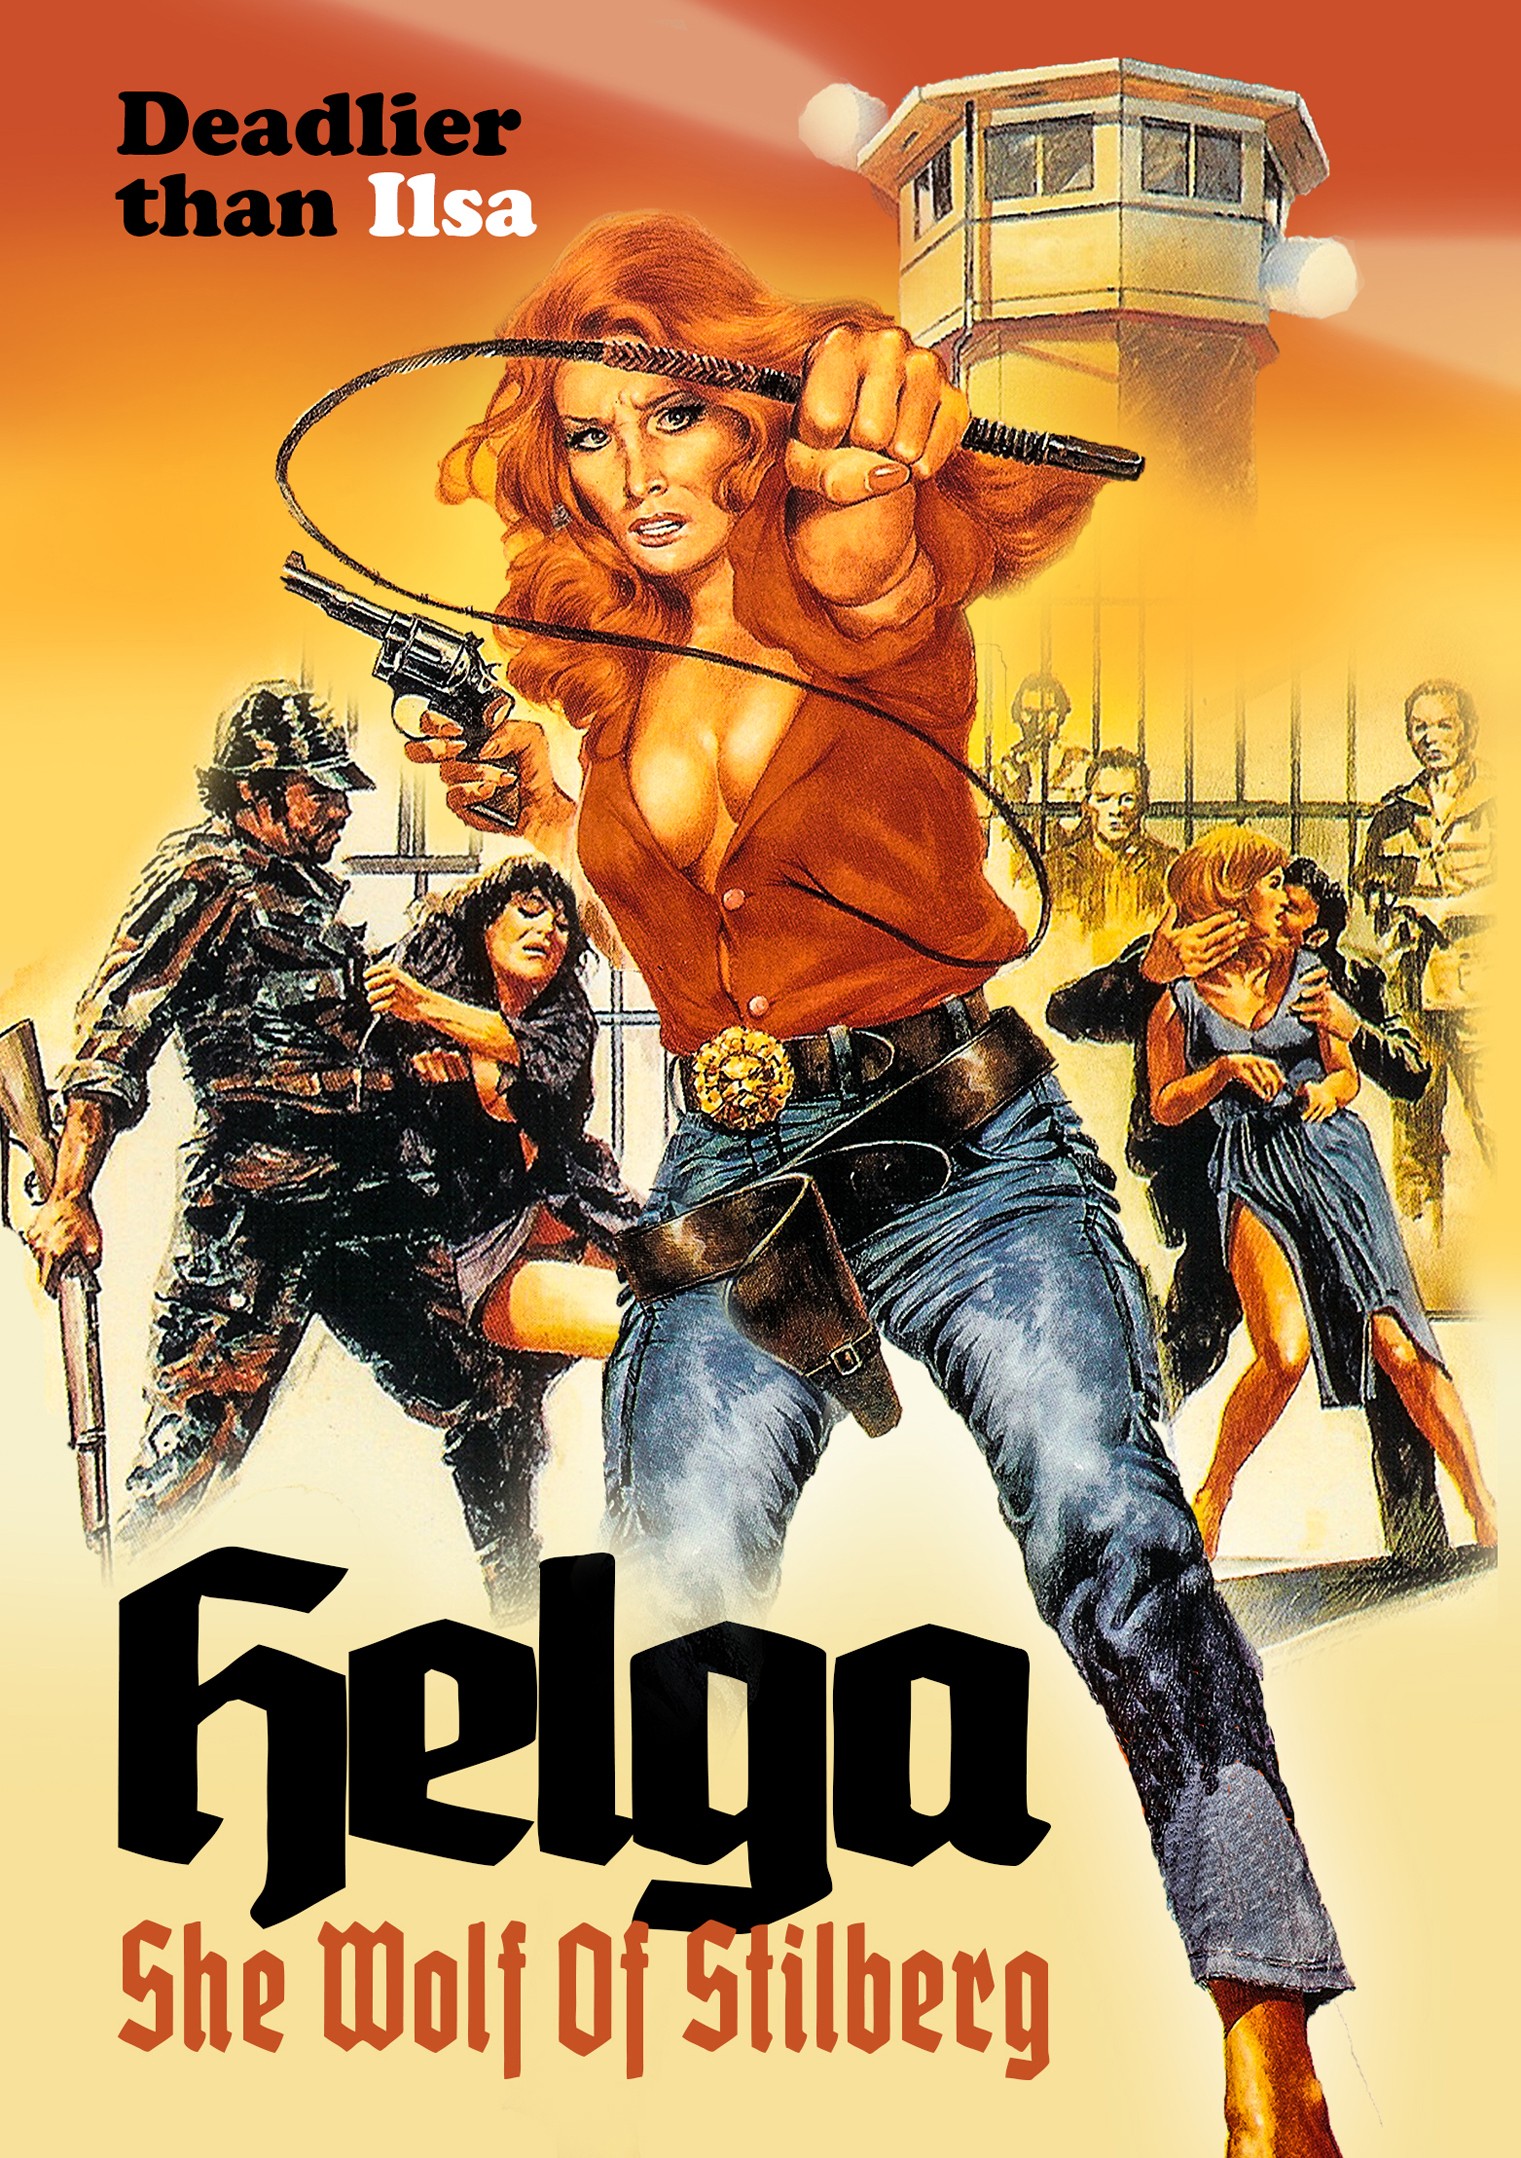 Download 18+Helga She Wolf of Spilberg 1977 French HDRip  480p ,720p, Movie